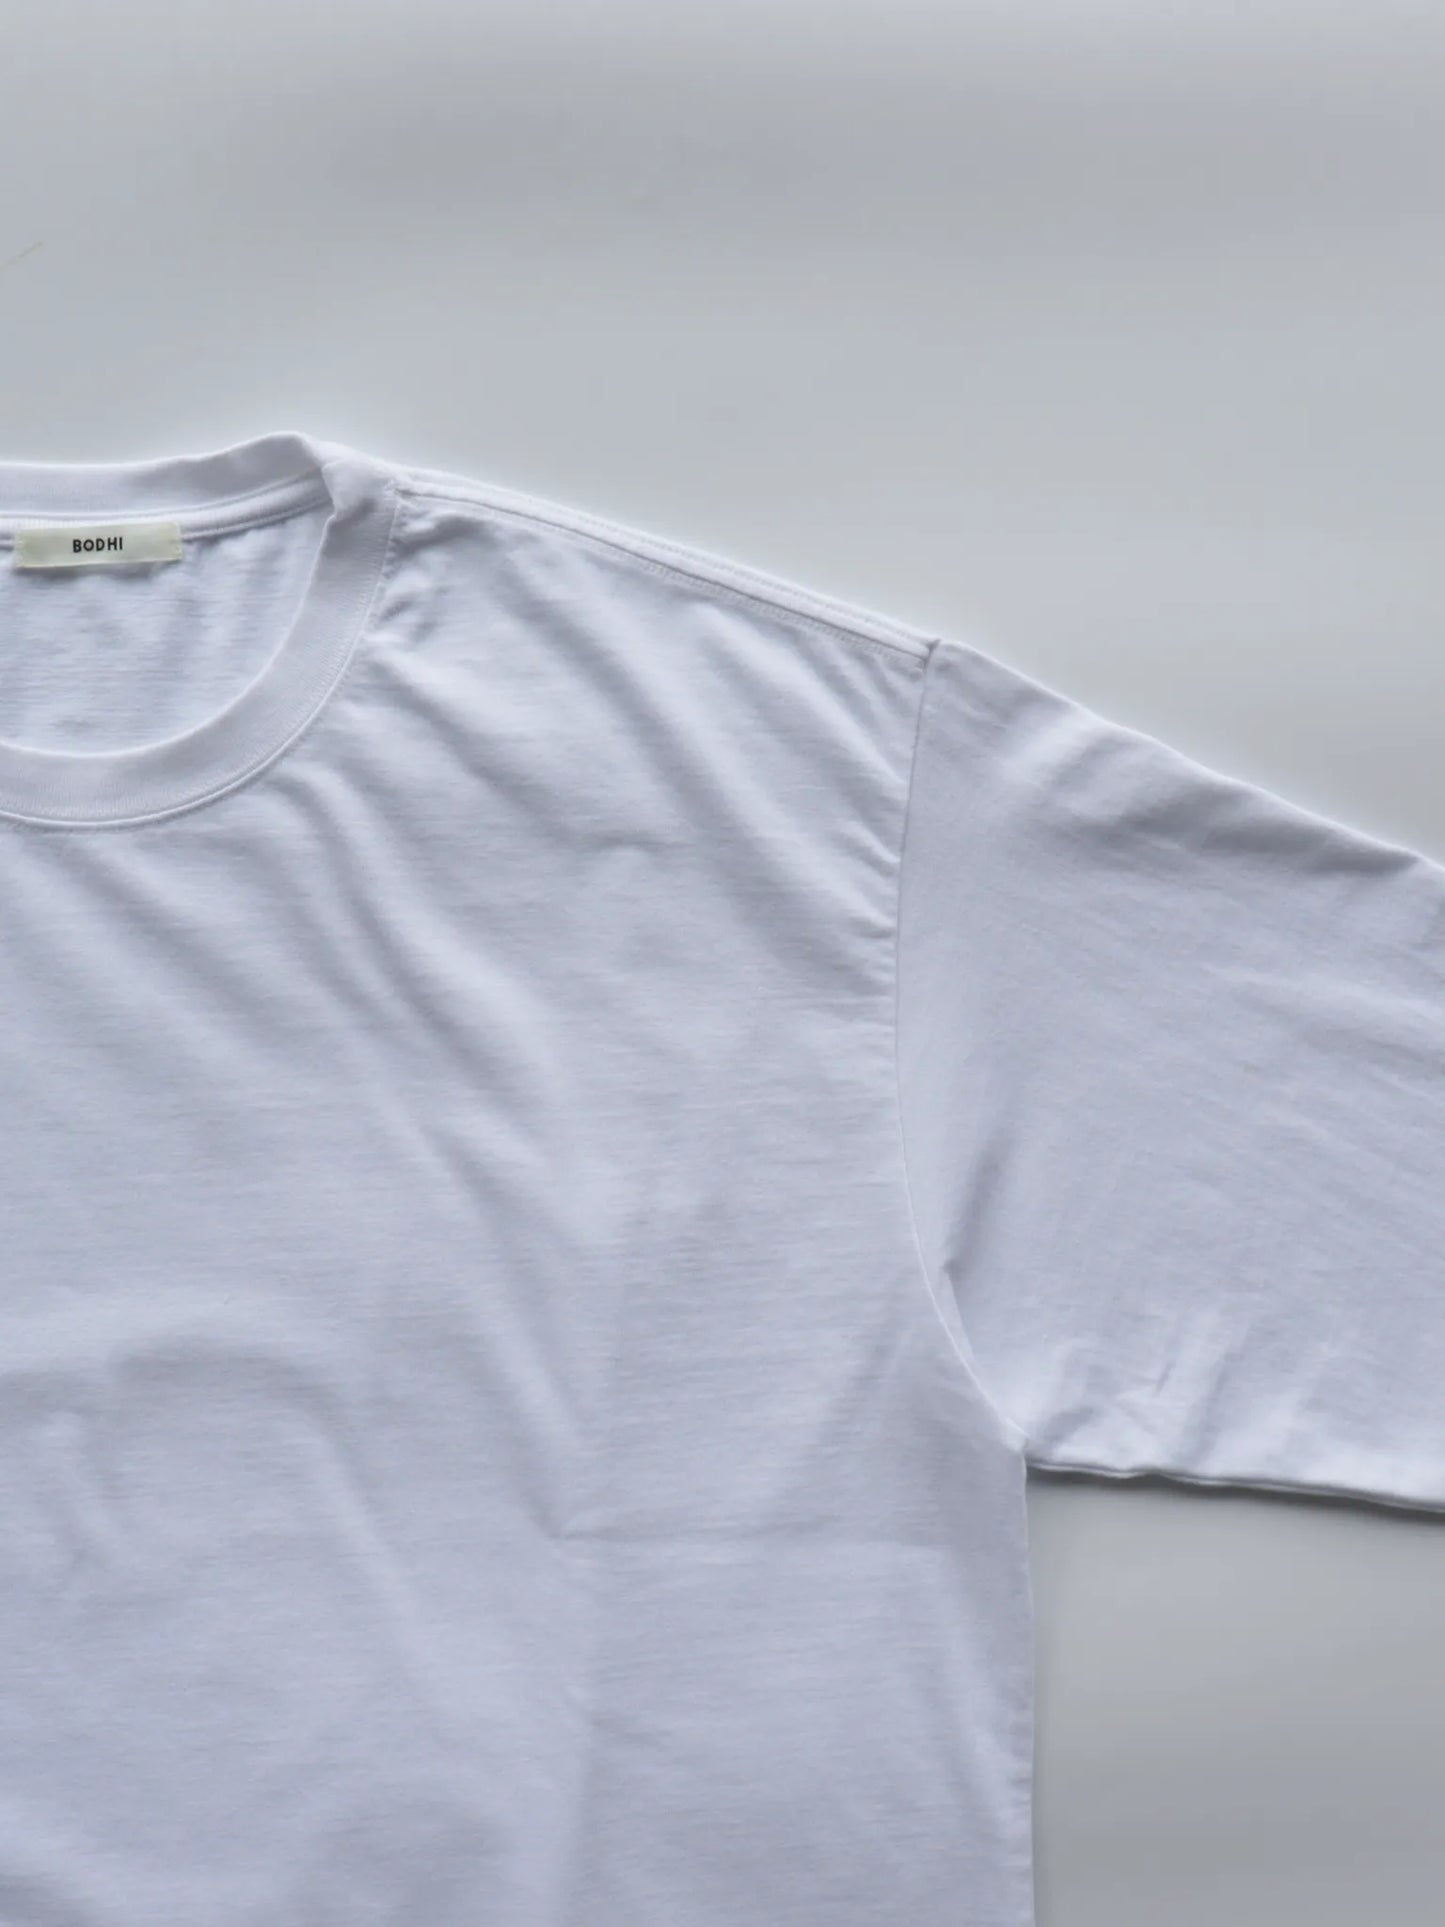 bodhi-middleweight-cotton-cashmere-long-sleeve-tee-white-2